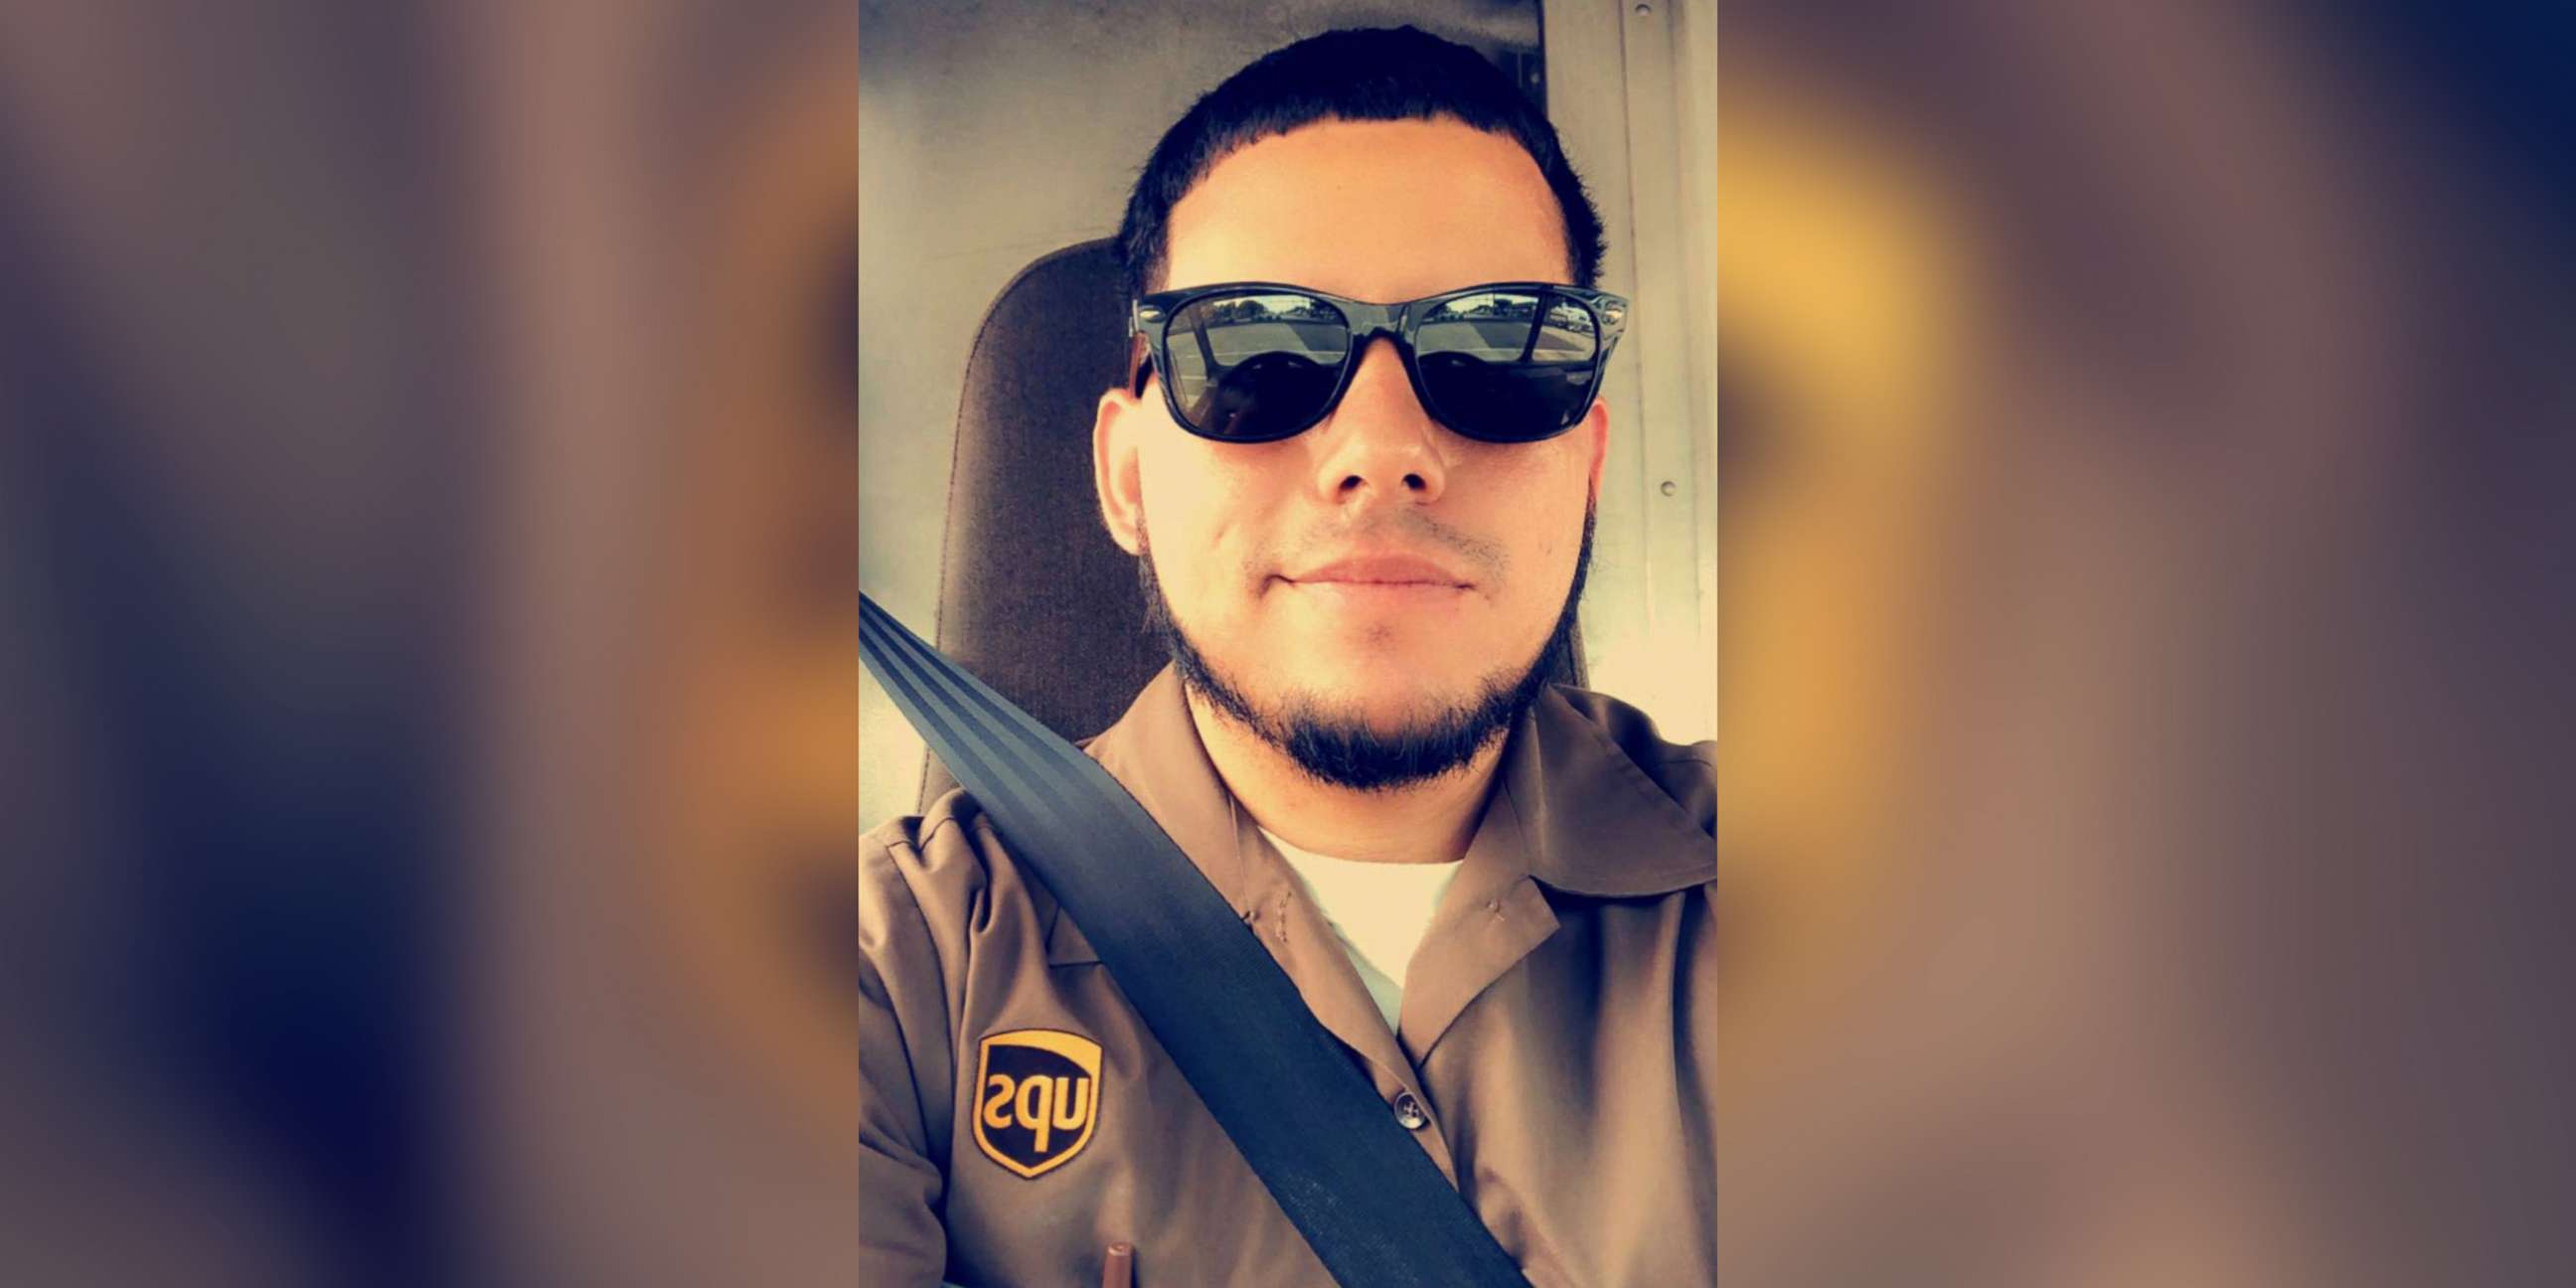 PHOTO: An undated photo shows Frank Ordonez, who was killed in a shootout in Miramar Fla., on Dec. 5, 2019, in a UPS uniform.